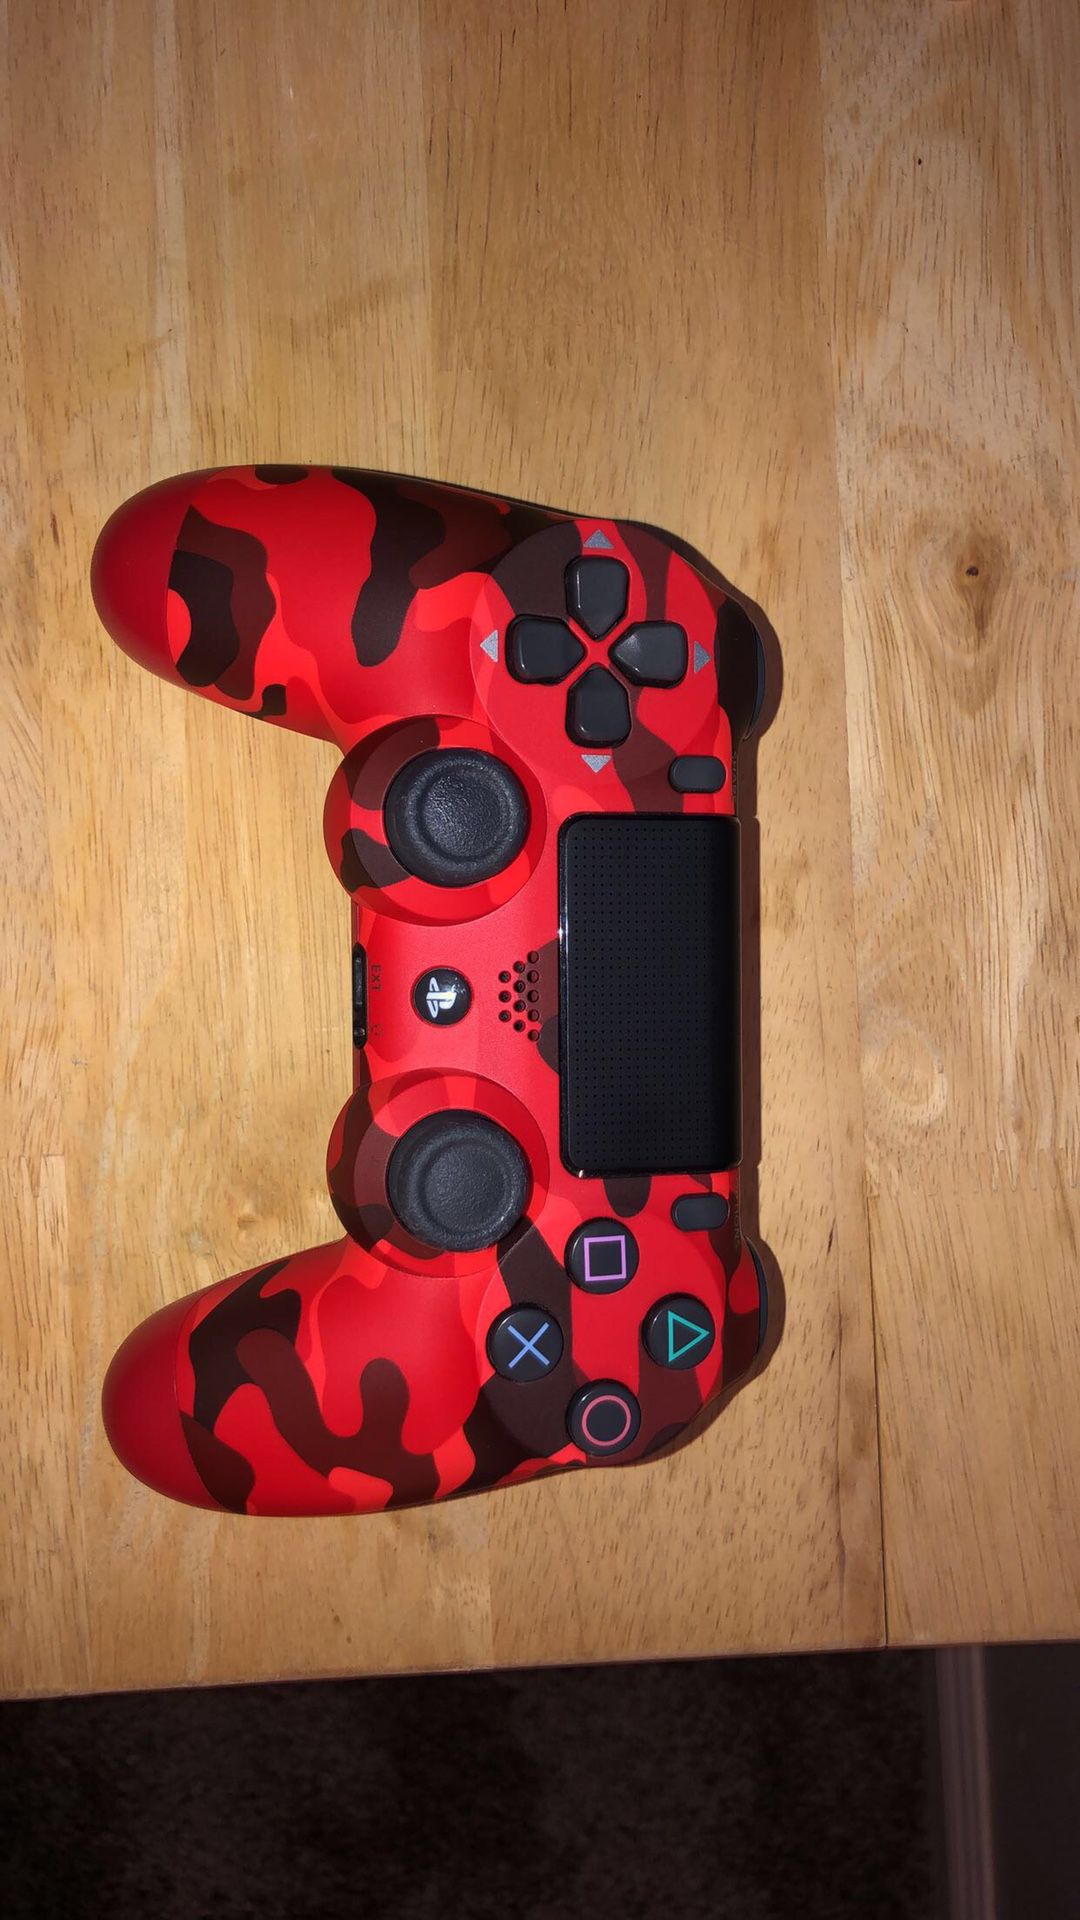 Red camo PS4 wireless controller